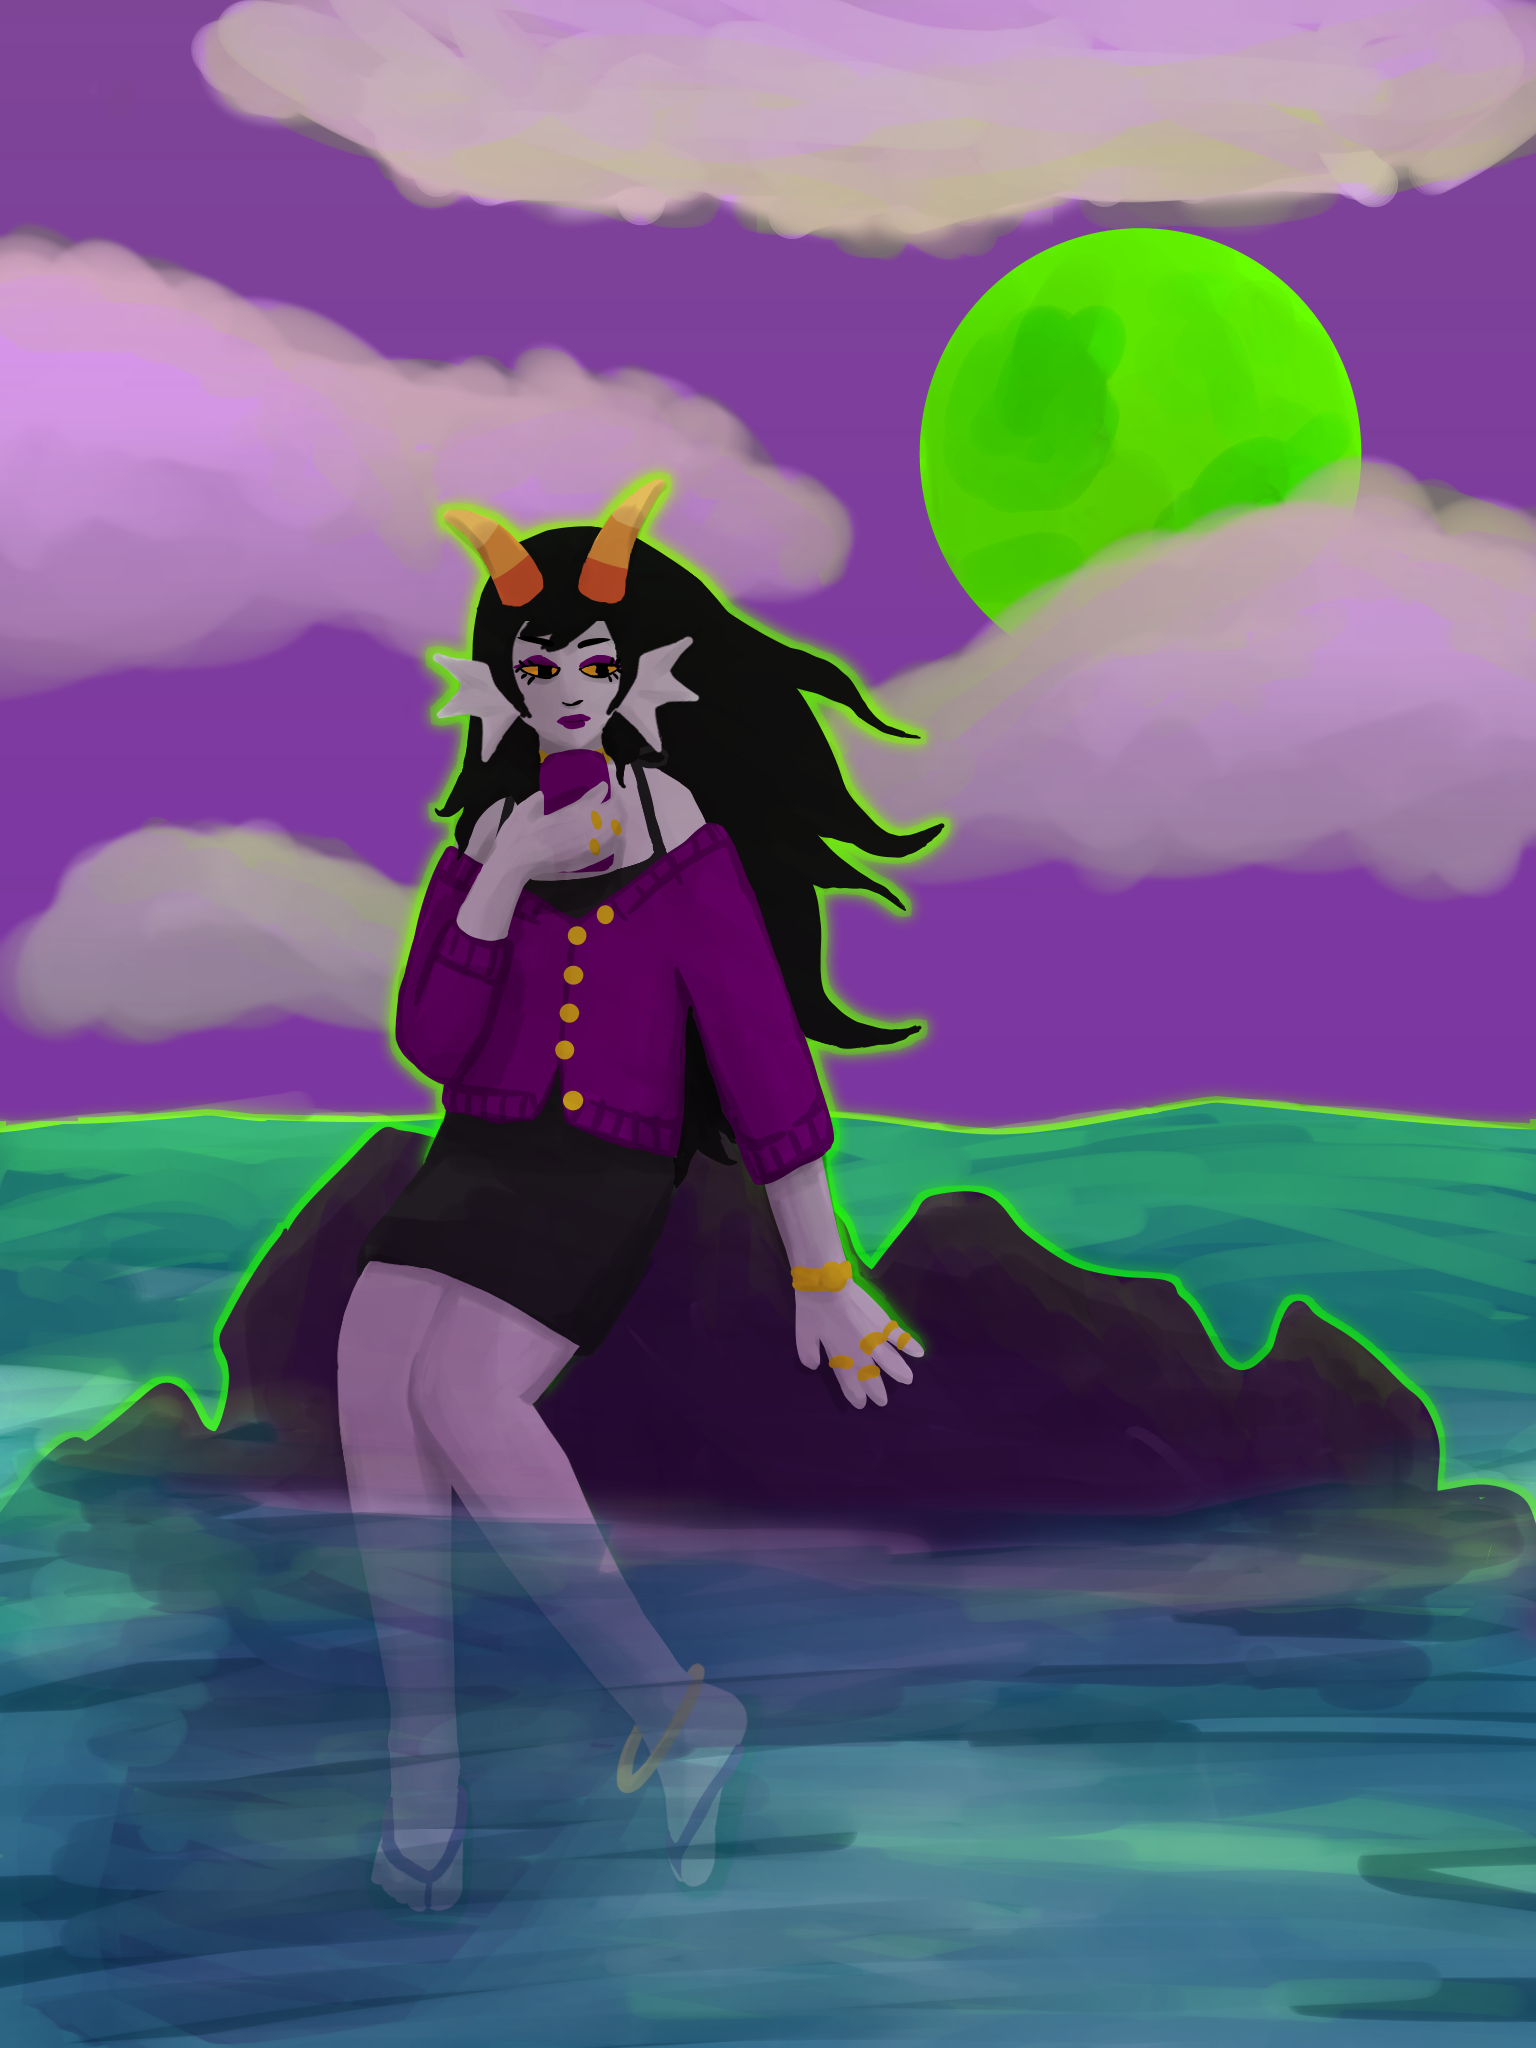 Art of Cridea sitting on some rocks in the ocean. She is backlit by Alternia's green moon. Cridea is a long haired female troll wearing a violet cardigan over a black mini dress, flip flops, and a bunch of gold jewellery.